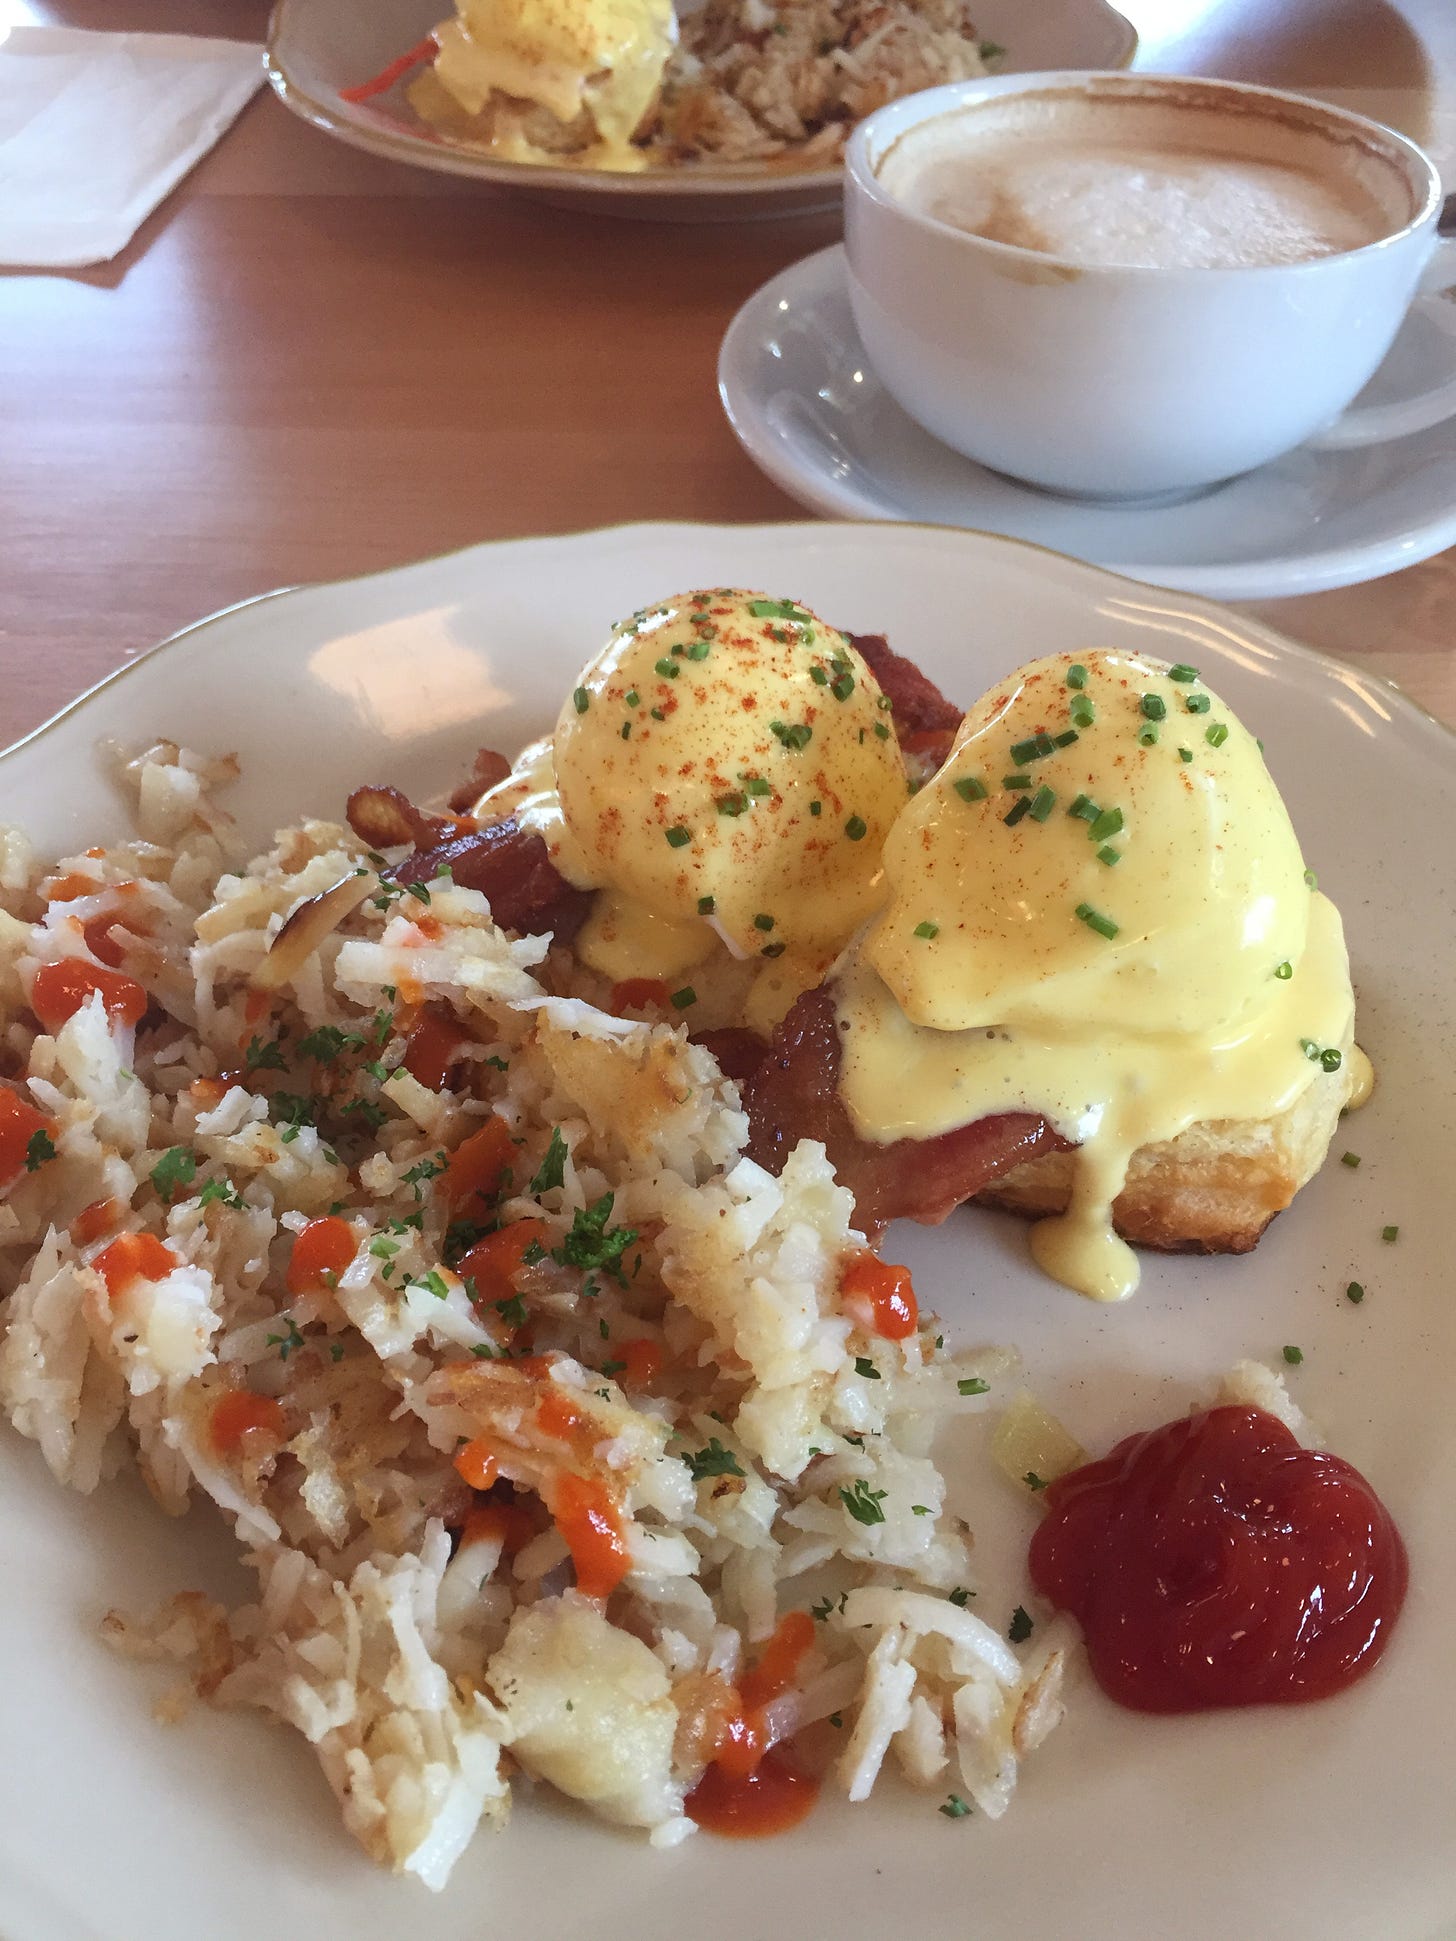 On a white plate with gently scalloped edges is a pile of shredded hash browns dotted with hot sauce, next to a small puddle of ketchup and in front of two eggs benedict, dusted with paprika and chives. A large cup with most of a latte rests on a sauce behind it, and a second plate of food is just visible in the background.